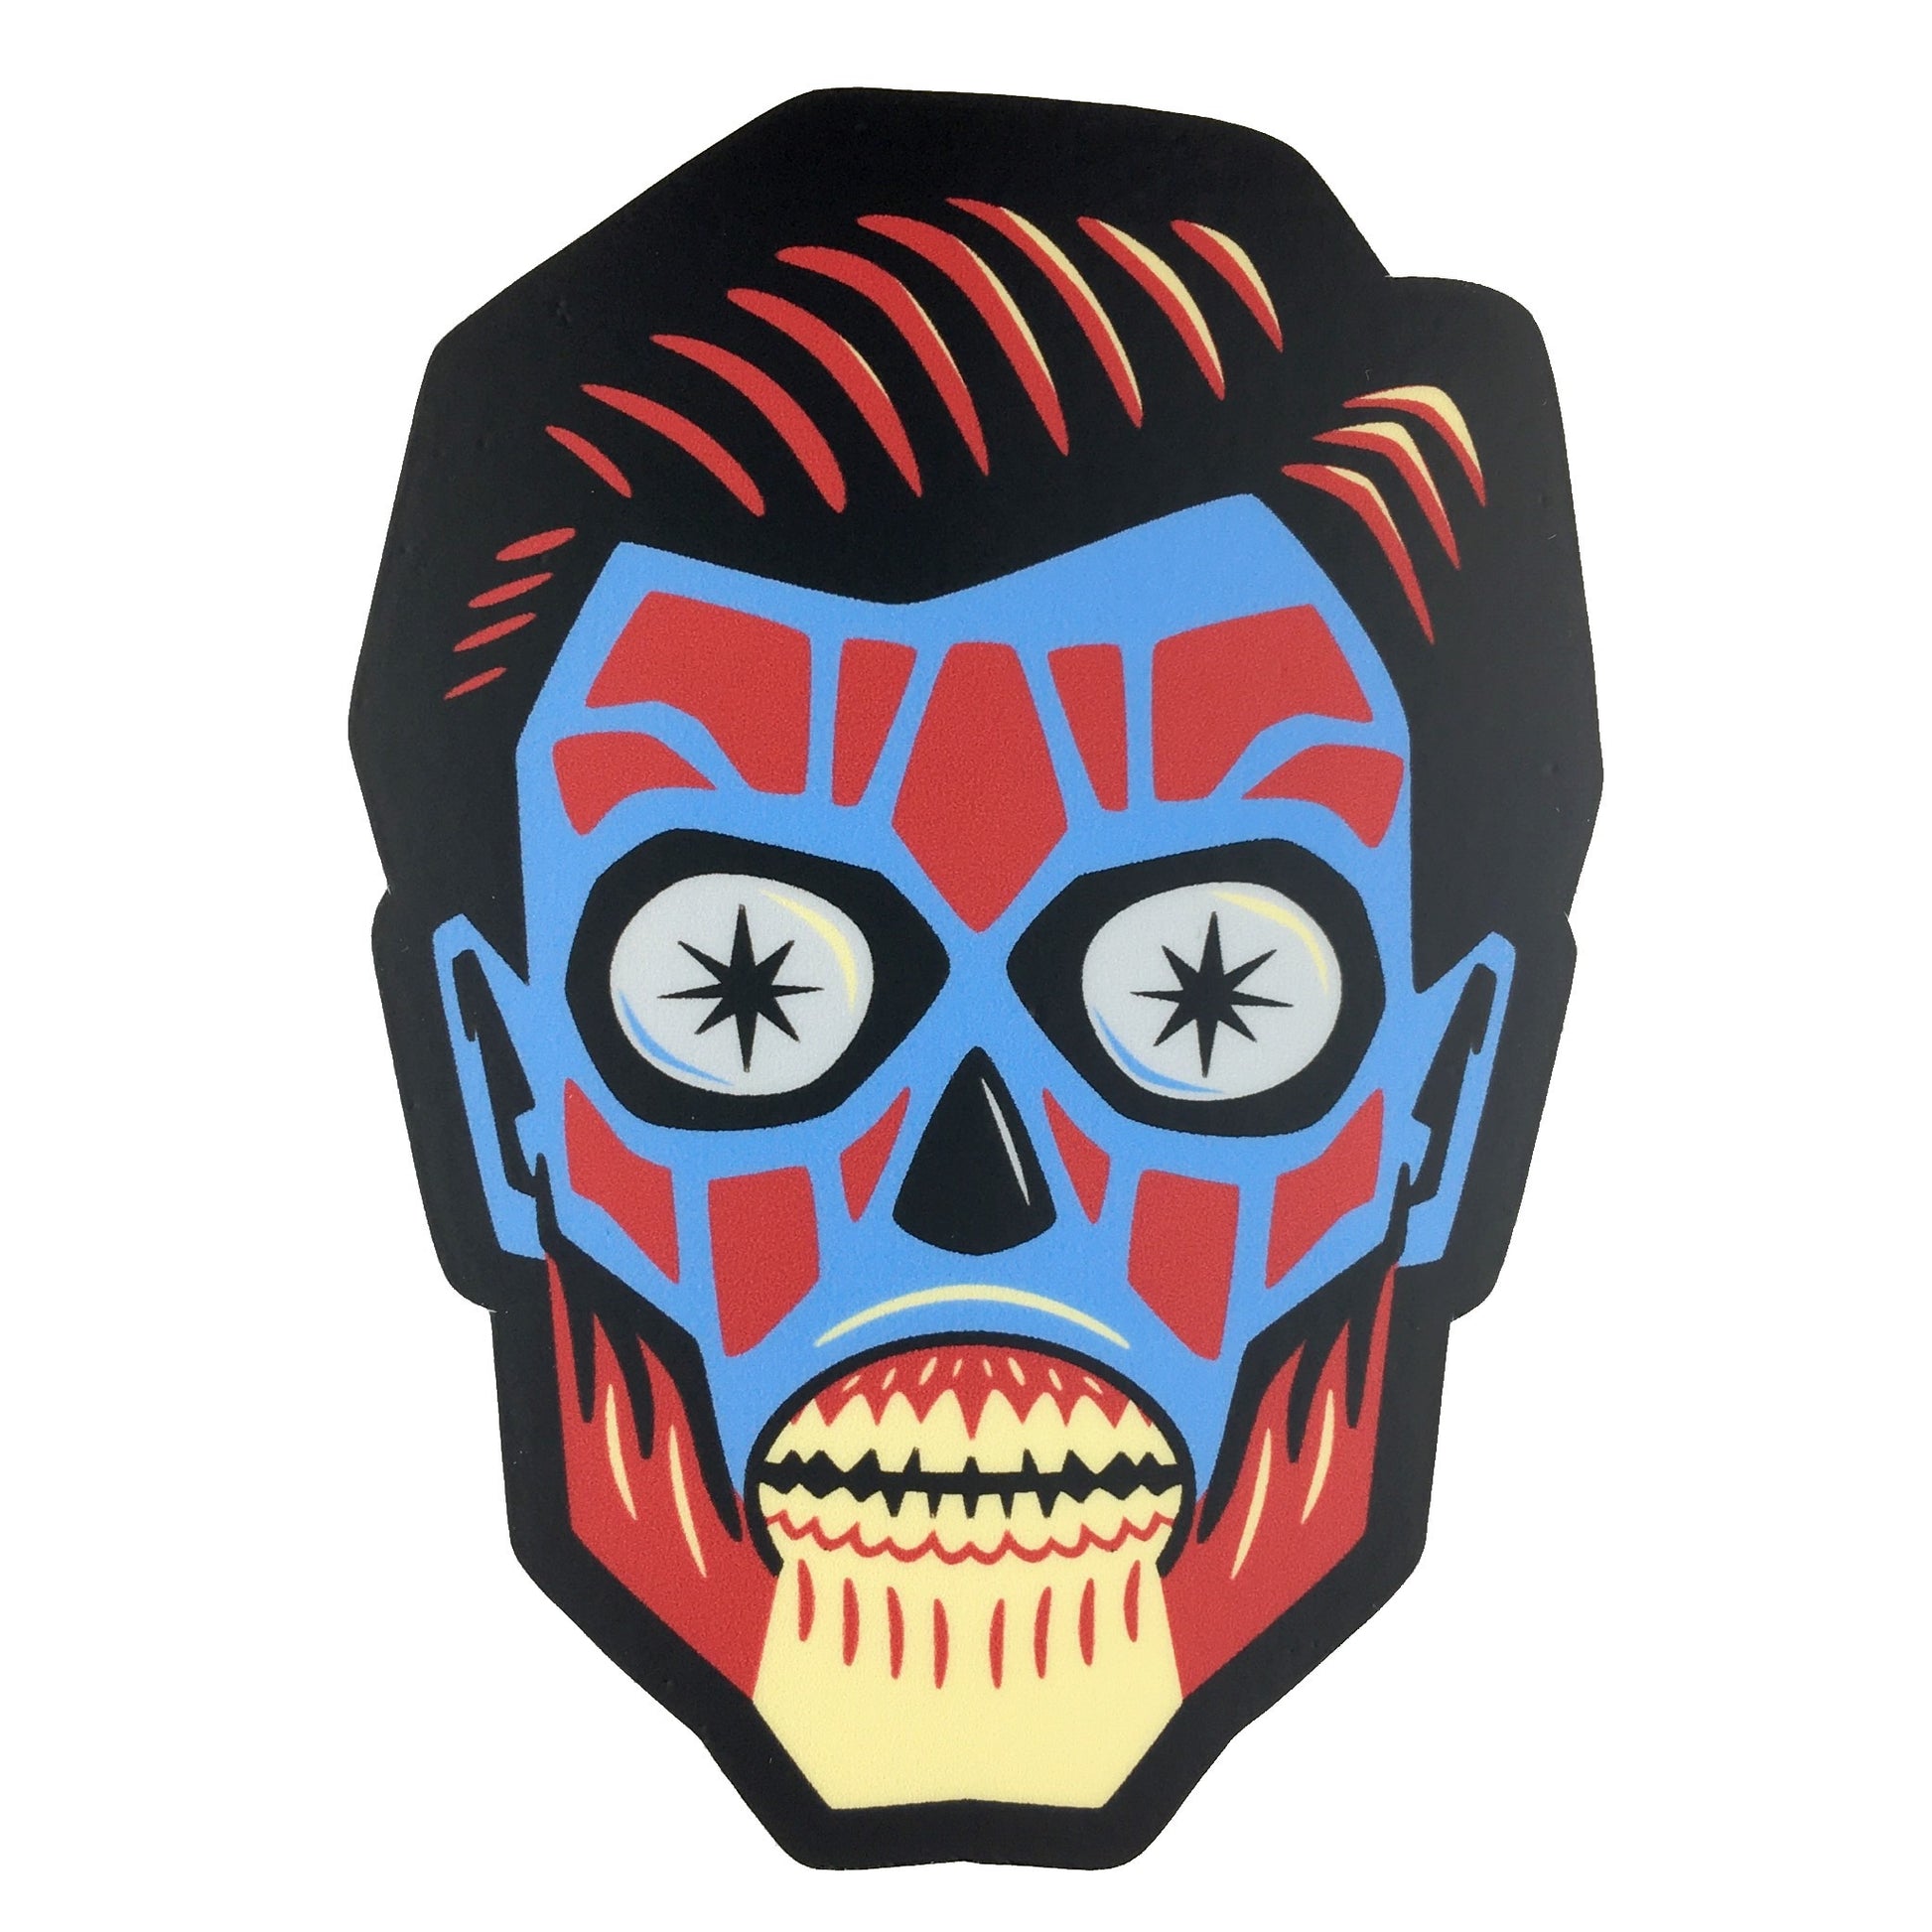 They Live alien head movie monster sticker by Monsterologist